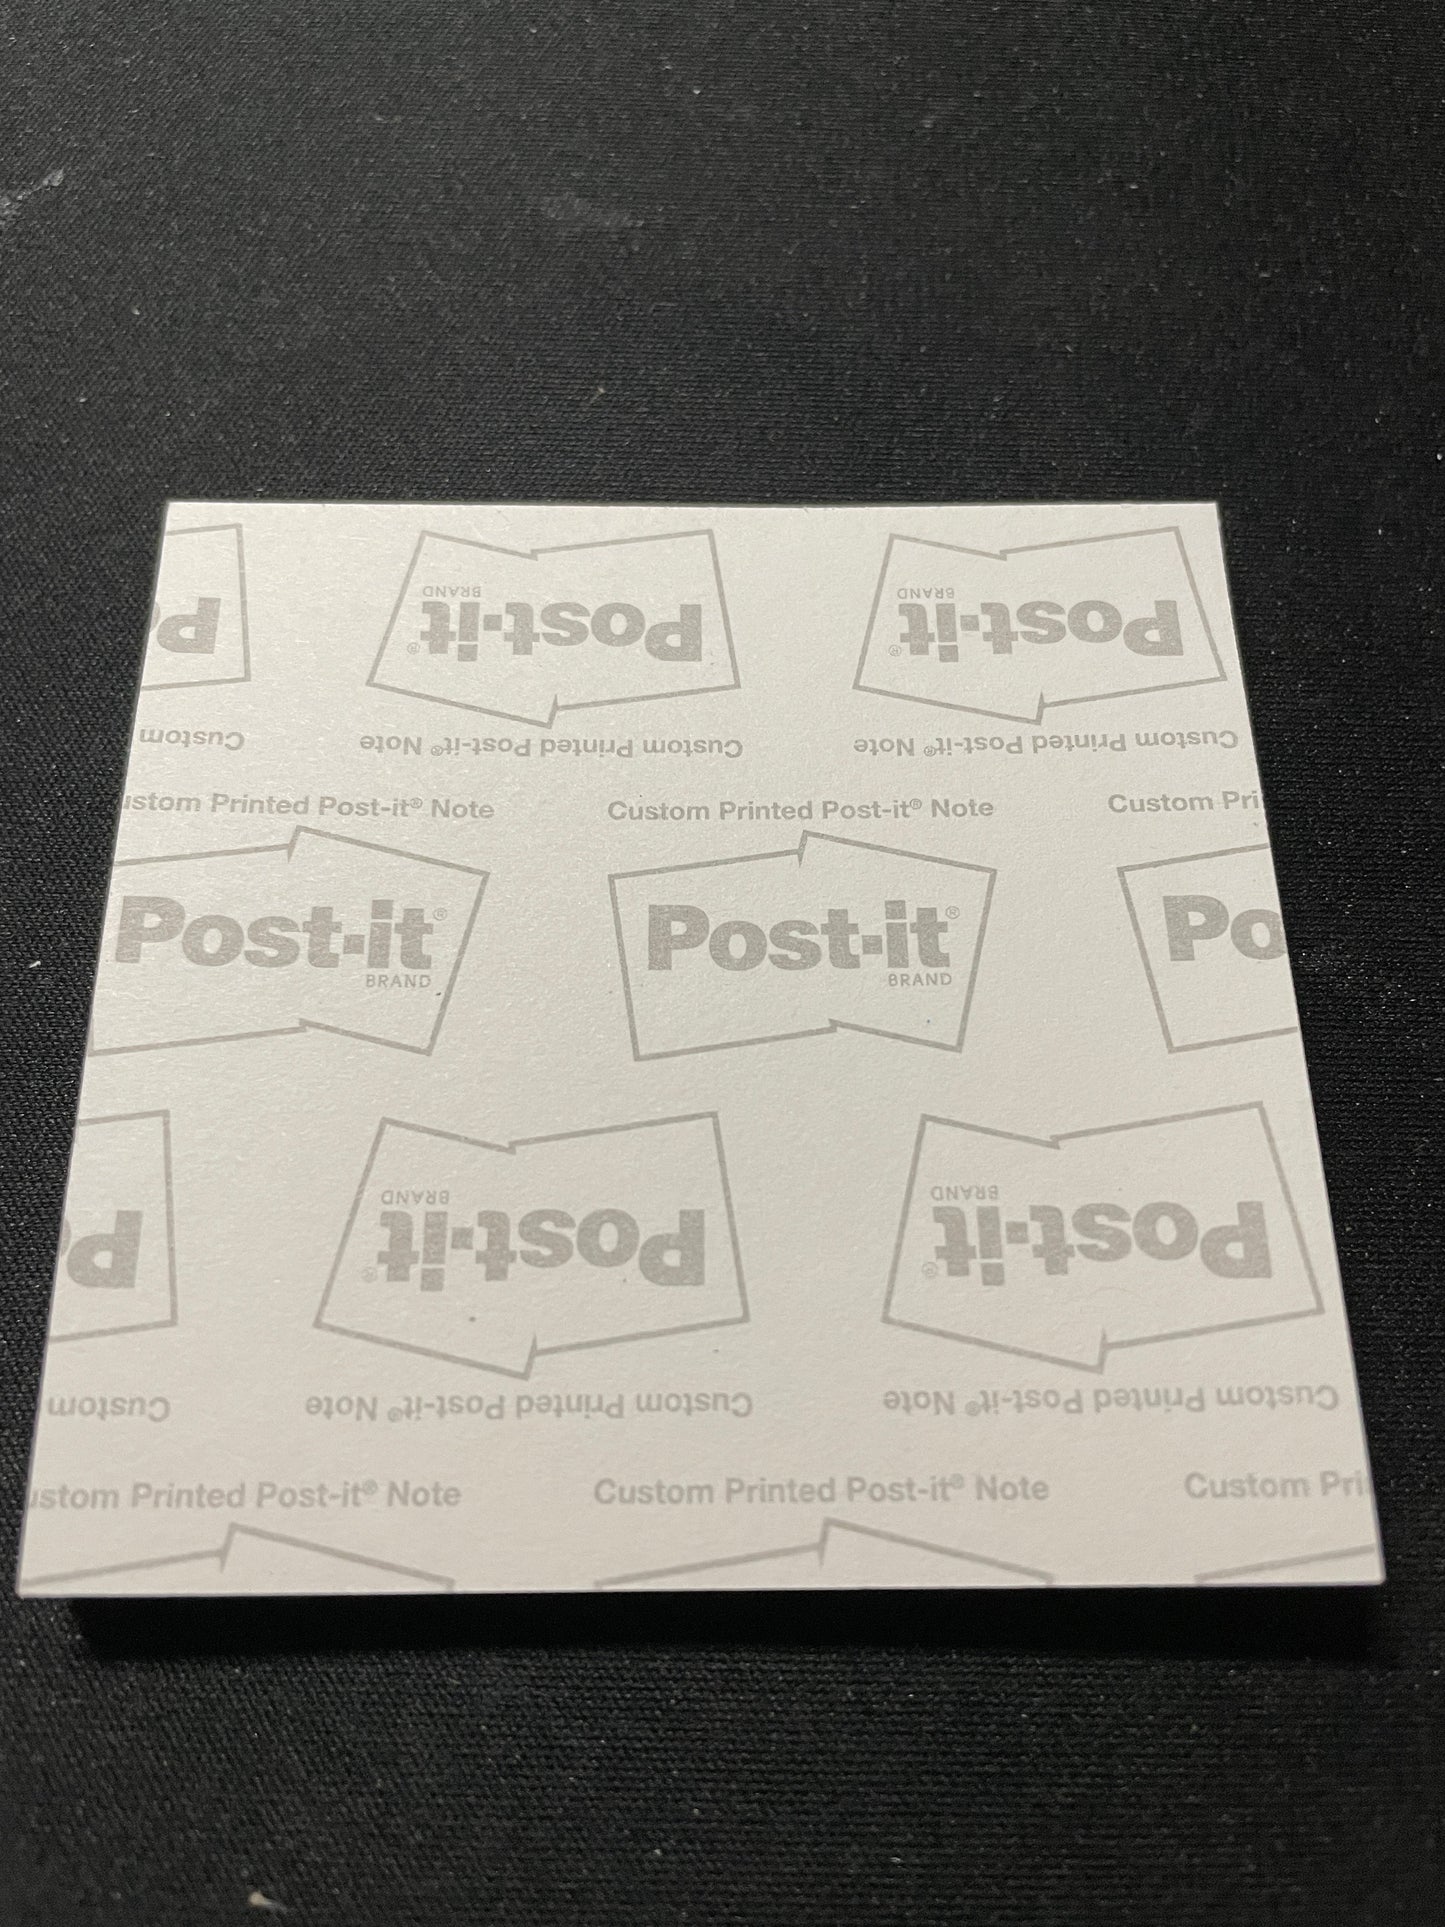 post it note - feeling stabby, butterfly heart, butterfly needle, nurse, rn, lab, phlebotomist, vampire, blood, hospital, doctors office, medical assistant, ma, sticky note, stickynote, postit note, custom post it notes, post it brand, designed by me